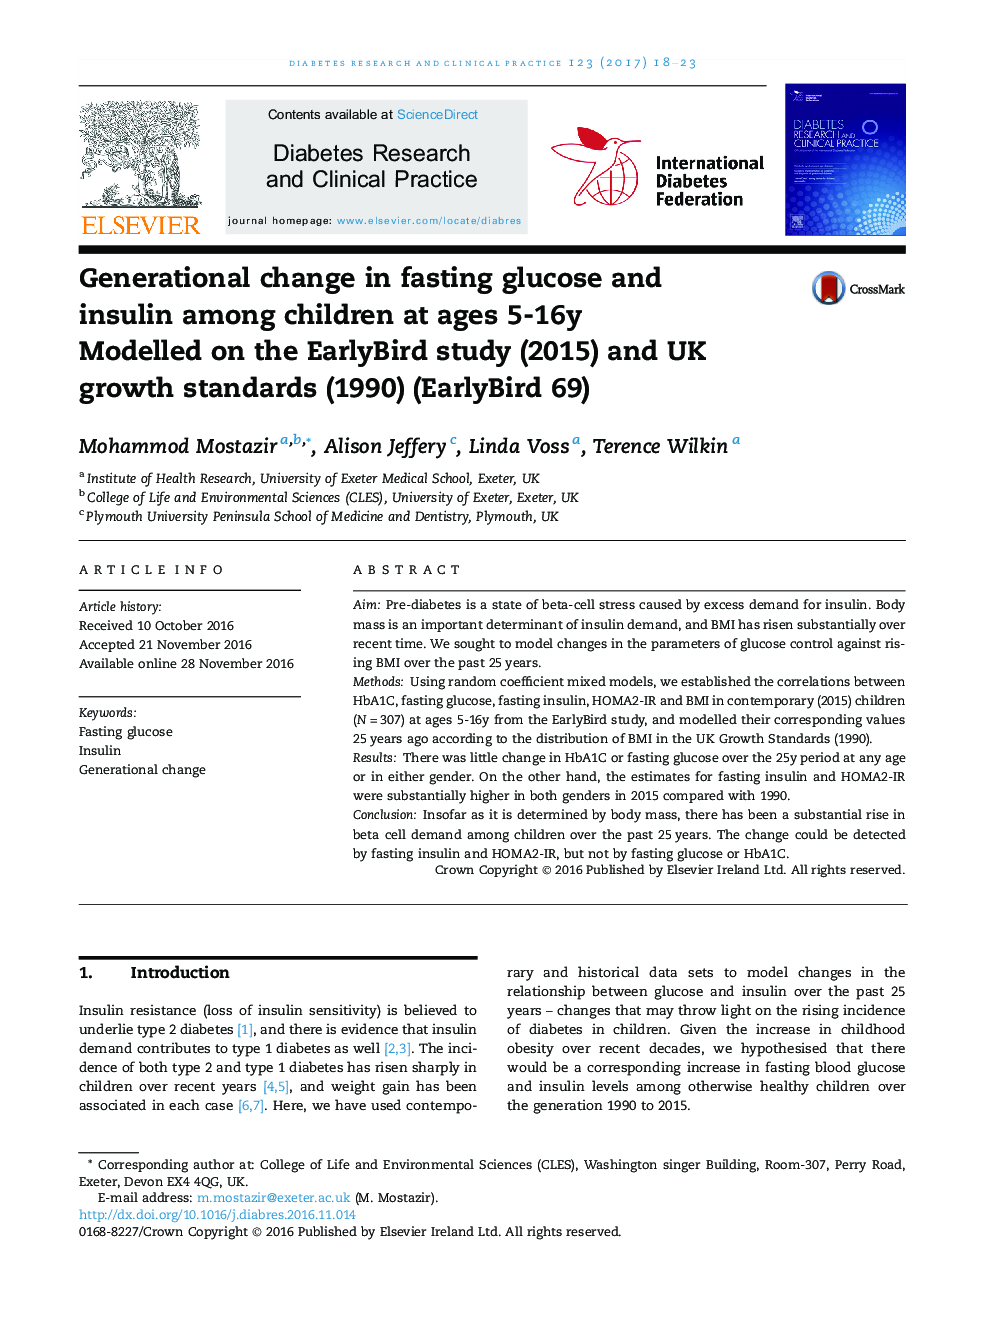 Generational change in fasting glucose and insulin among children at ages 5-16y: Modelled on the EarlyBird study (2015) and UK growth standards (1990) (EarlyBird 69)